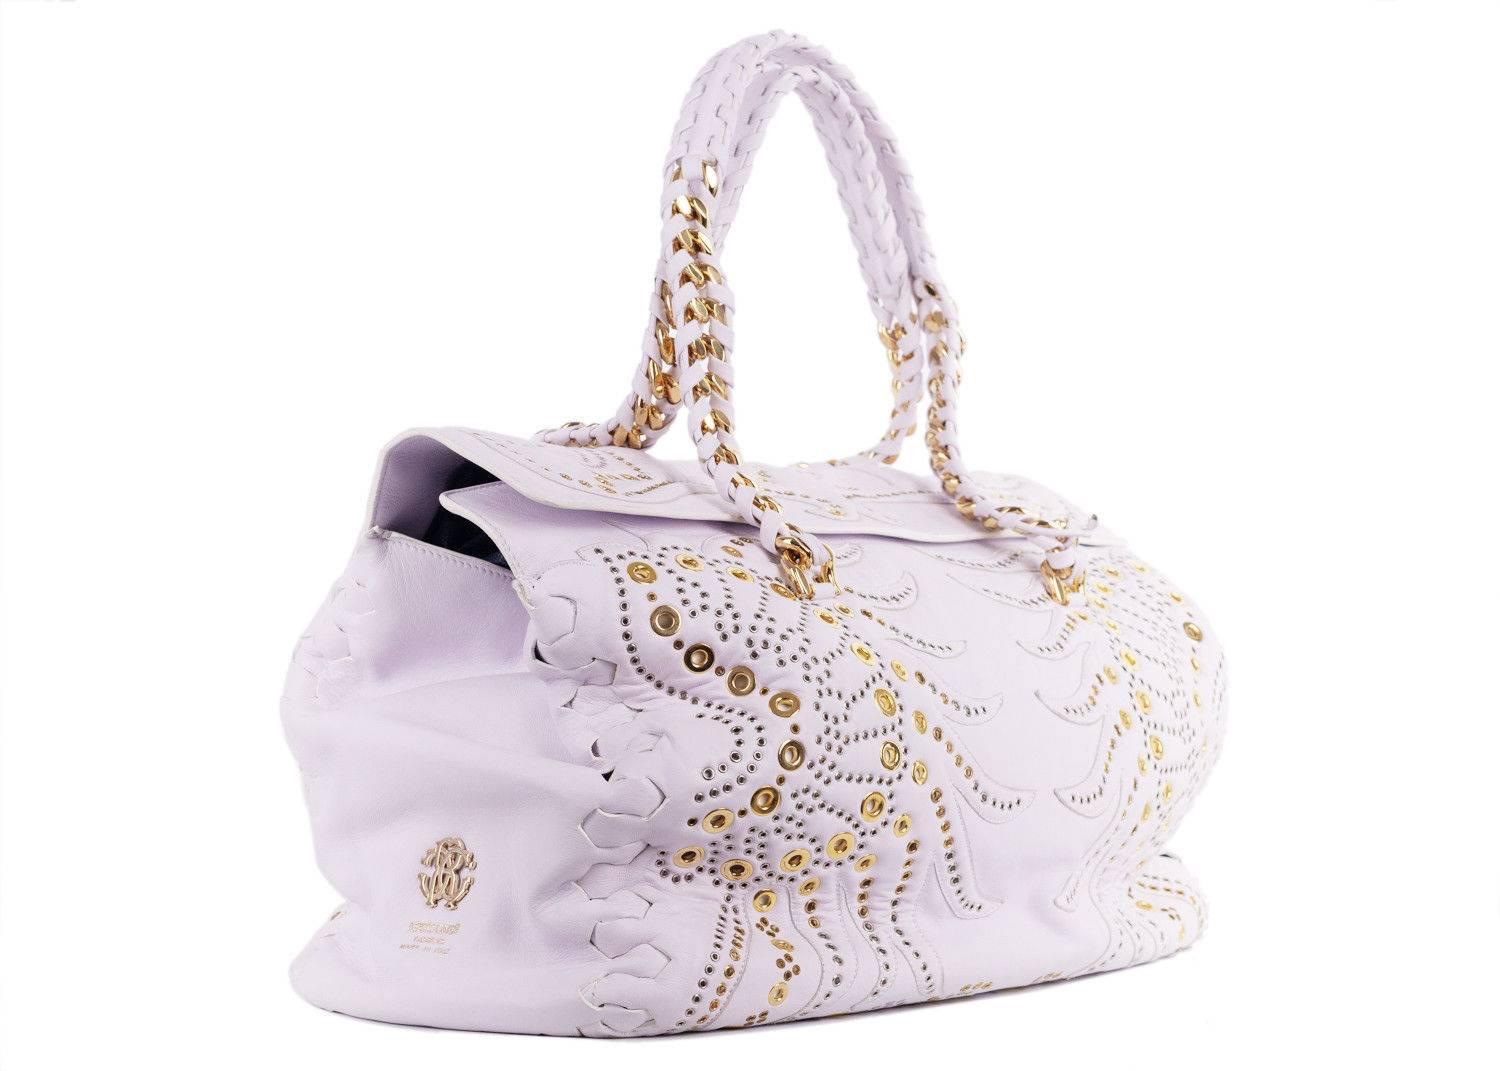 Roberto Cavalli Regina Medium Radiant Studded White Leather Satchel In New Condition For Sale In Brooklyn, NY